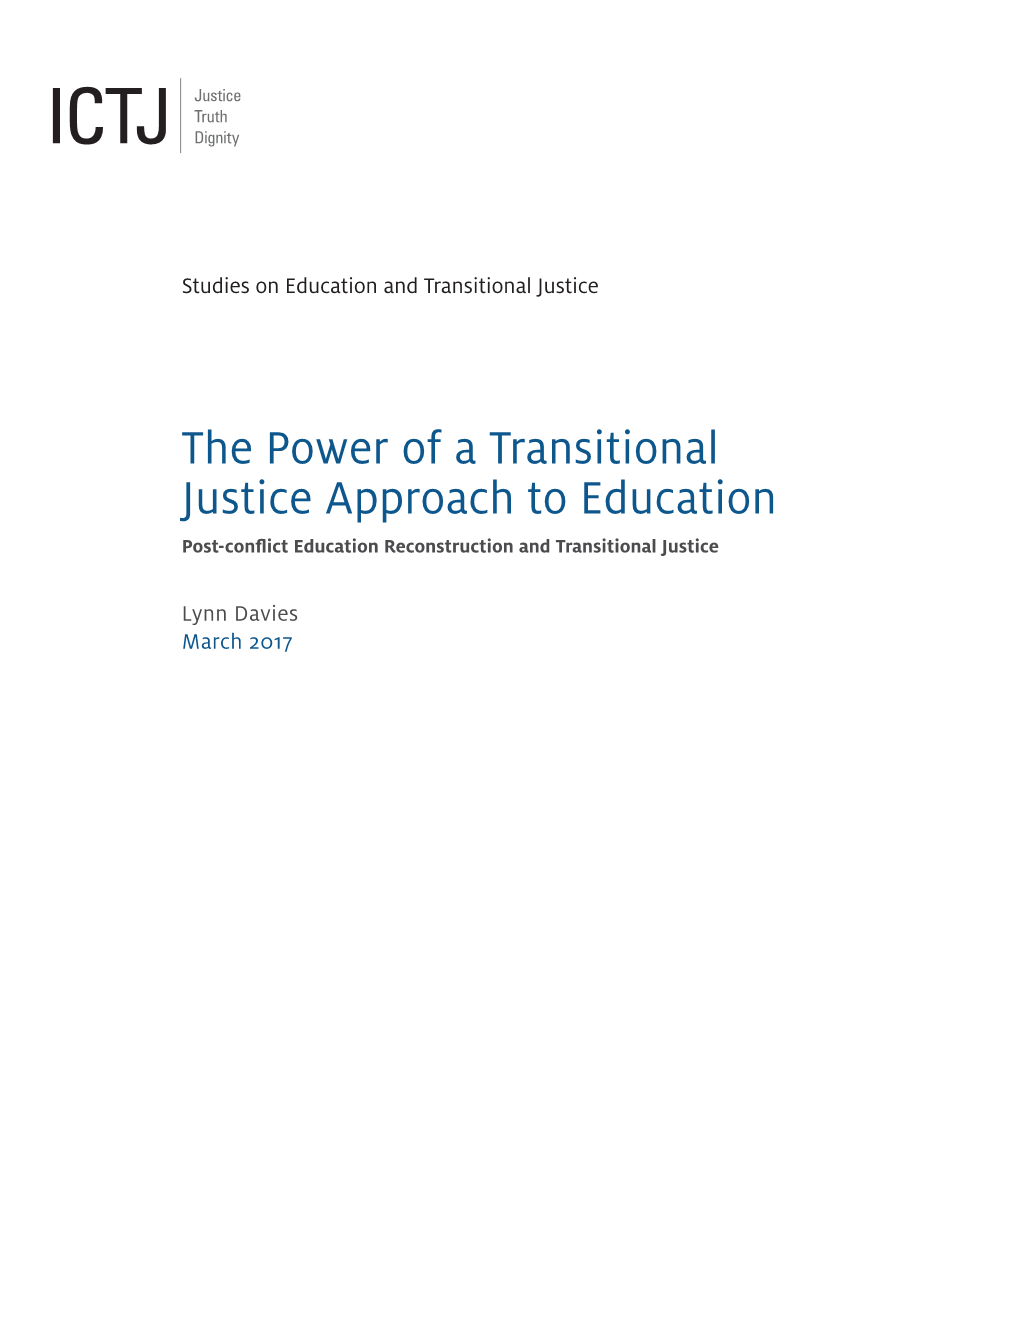 The Power of a Transitional Justice Approach to Education Post-Confl Ict Education Reconstruction and Transitional Justice